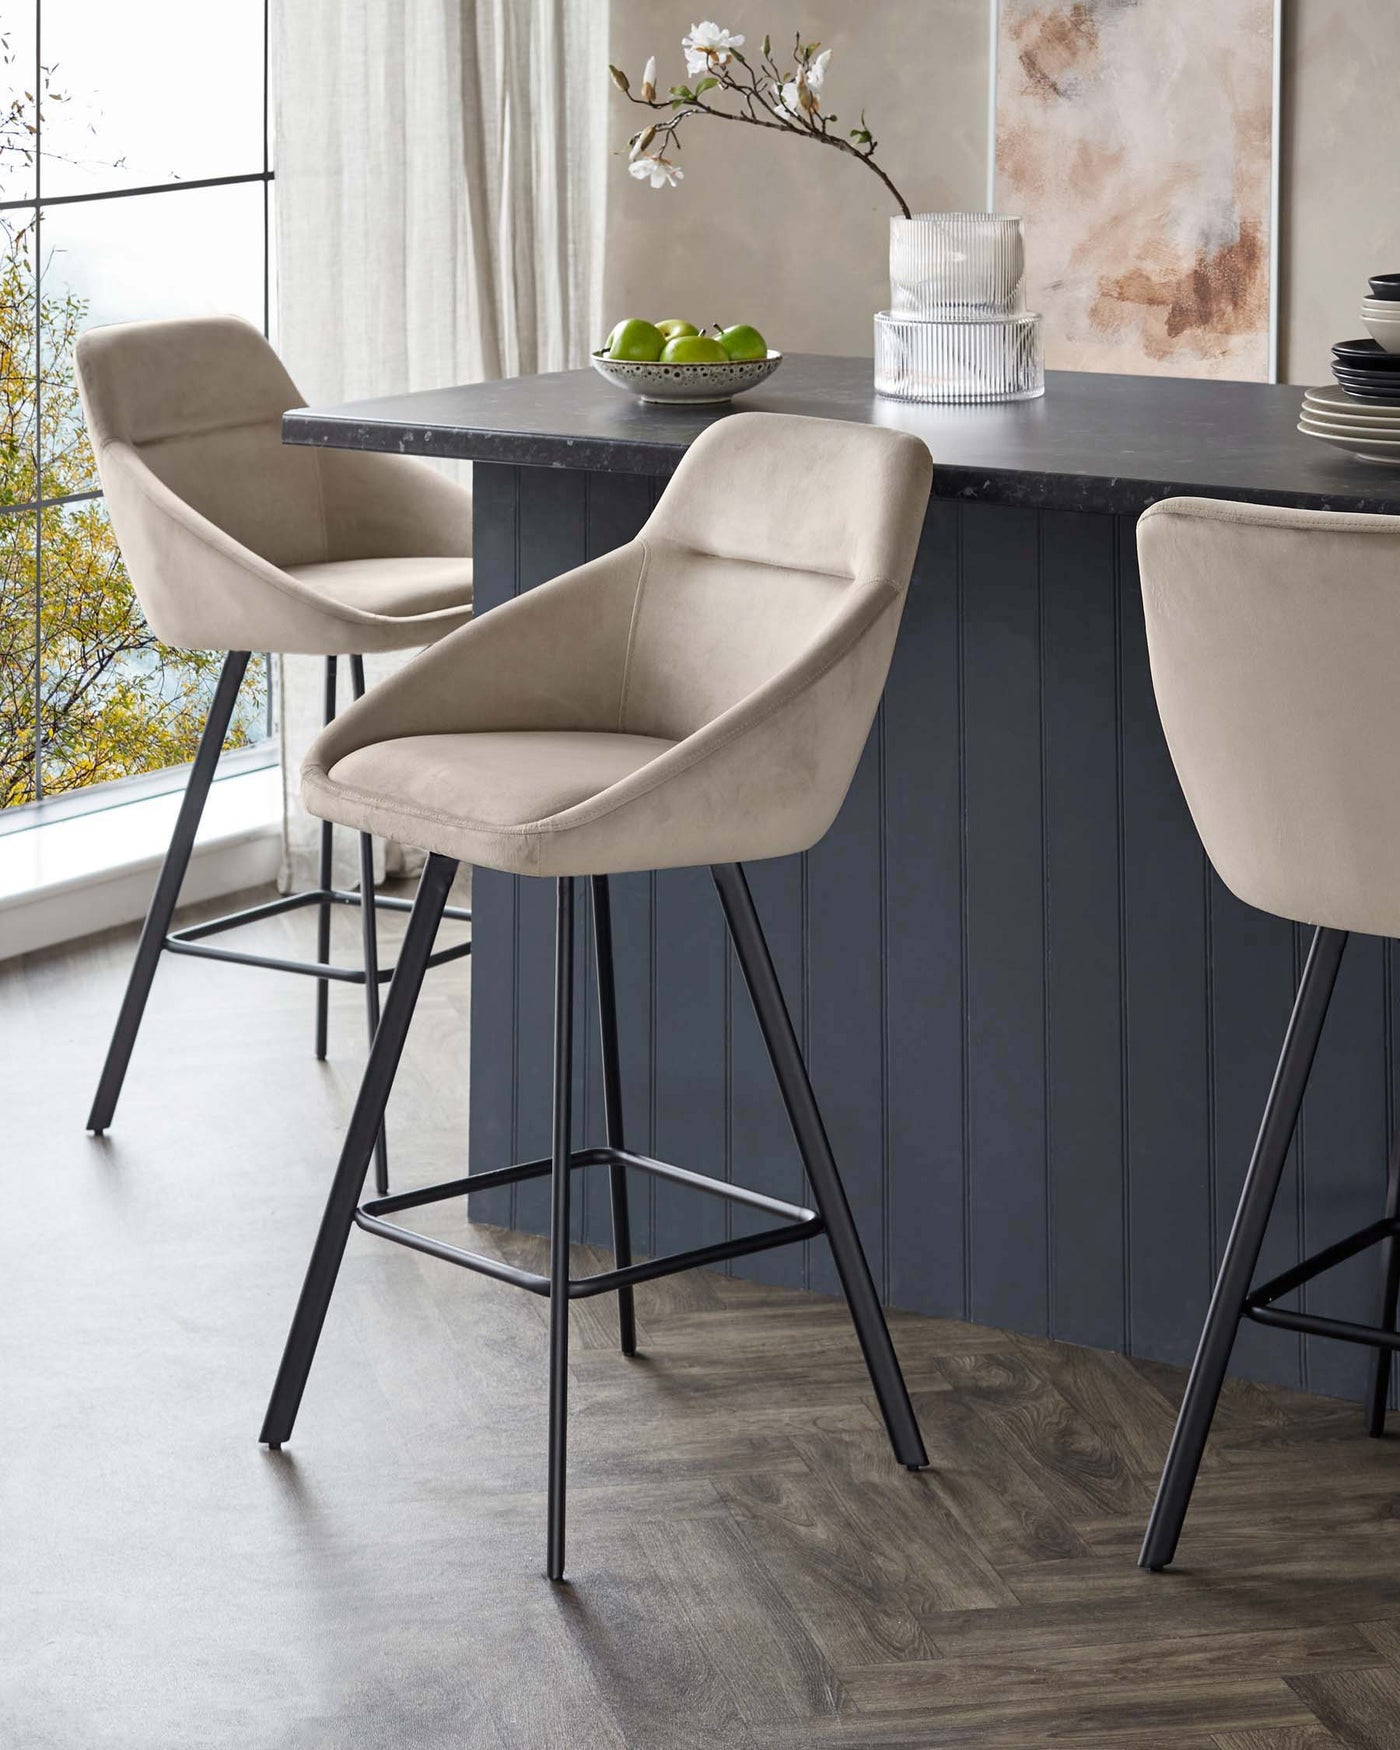 Elegant modern bar stools with beige upholstery and black metal legs, paired with a dark stone countertop kitchen island in a stylish interior with a herringbone wood floor.